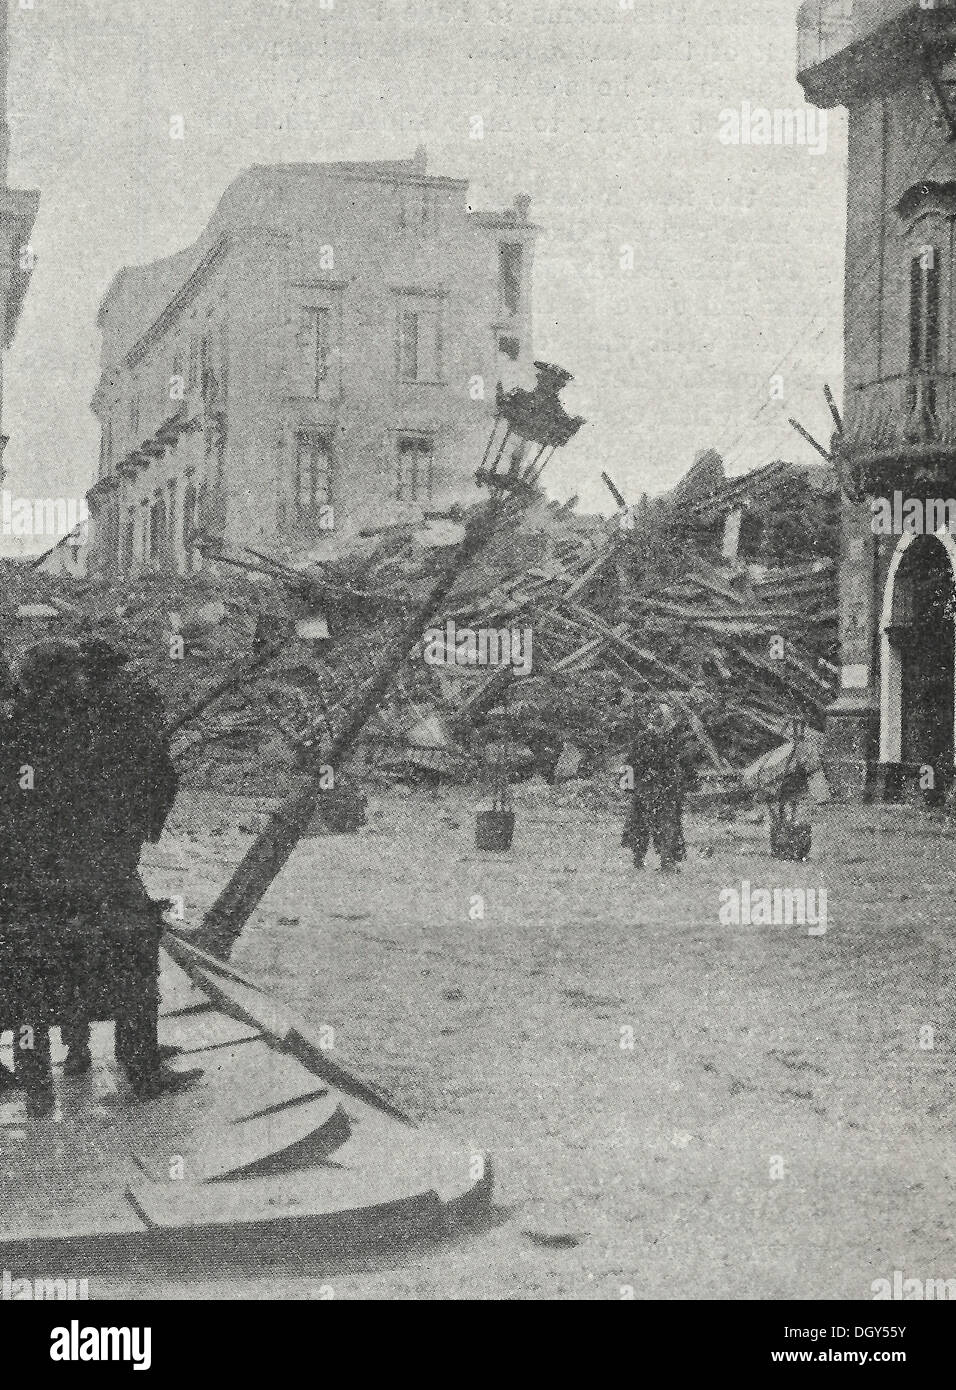 The wreckage in the Via Cavour, Messina - Italy Earthquake 1908 Stock Photo